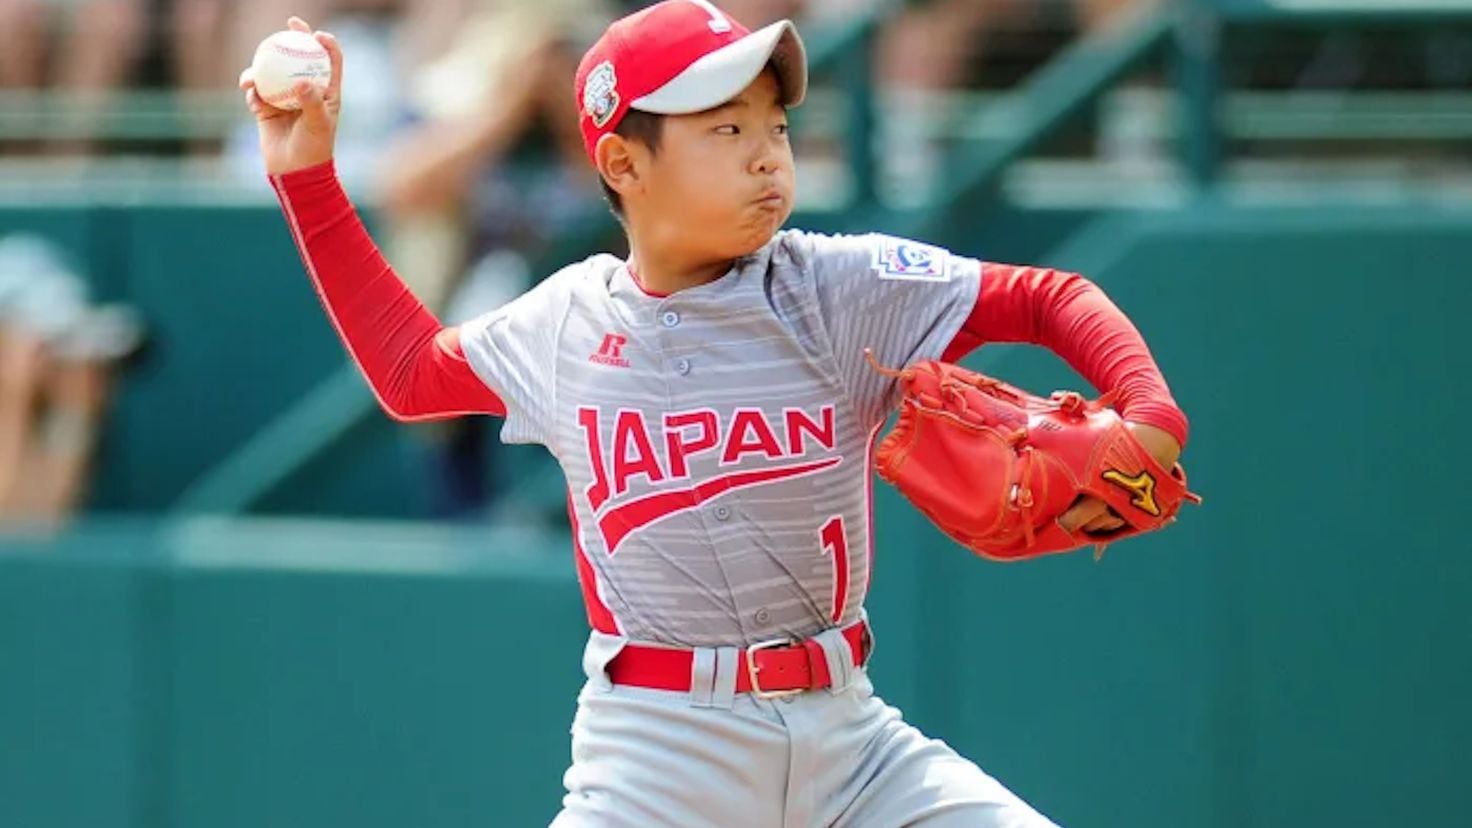 Little League World Series players who made the majors